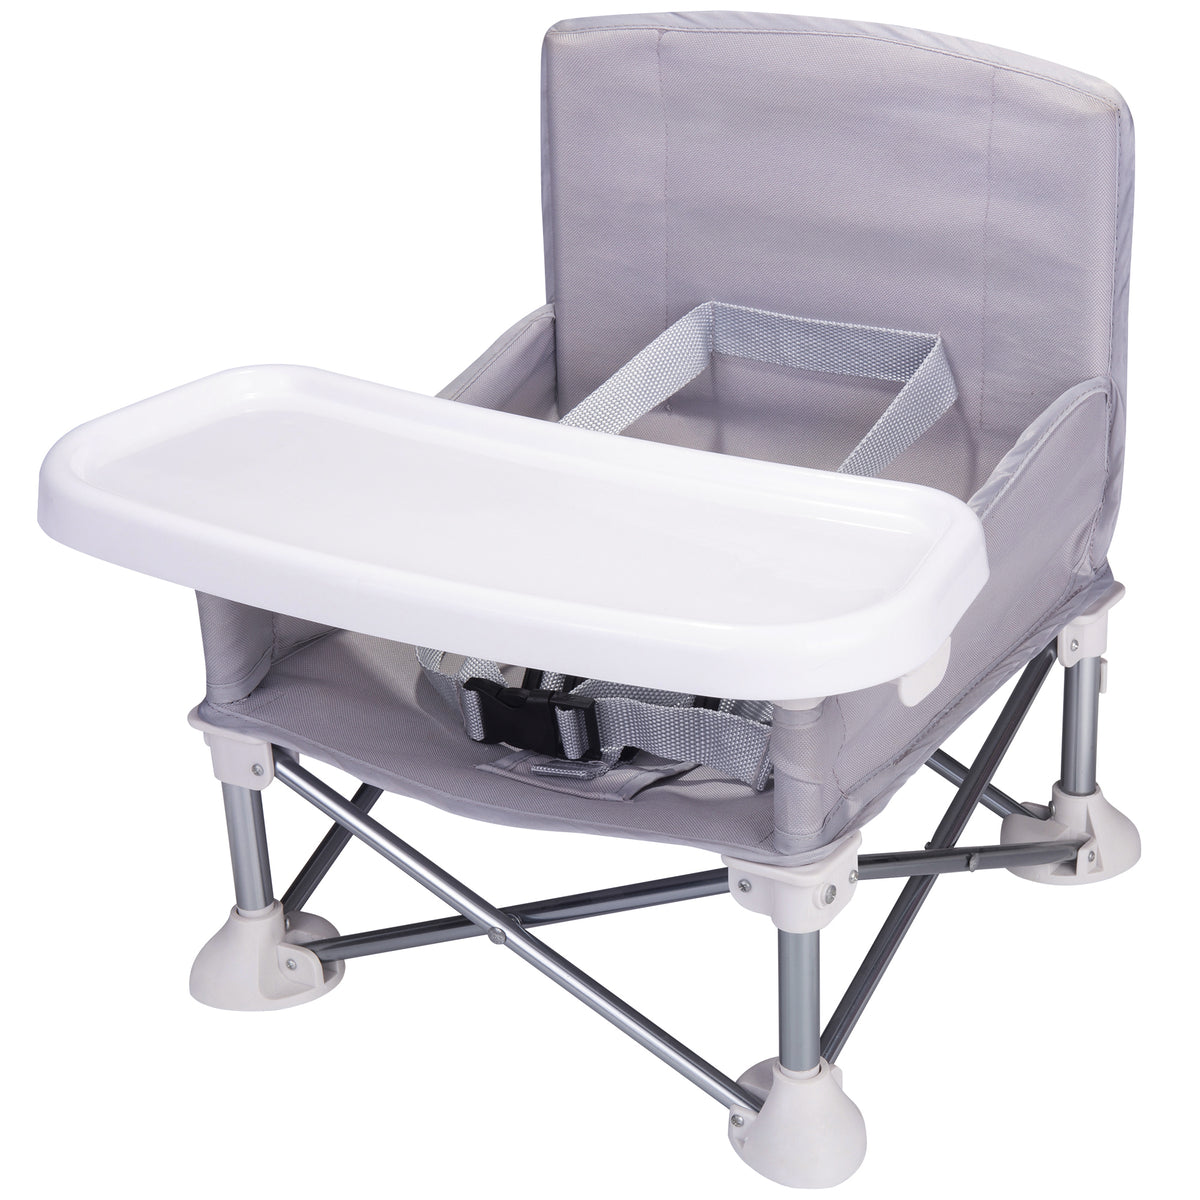 Portable Booster Chair for Kids